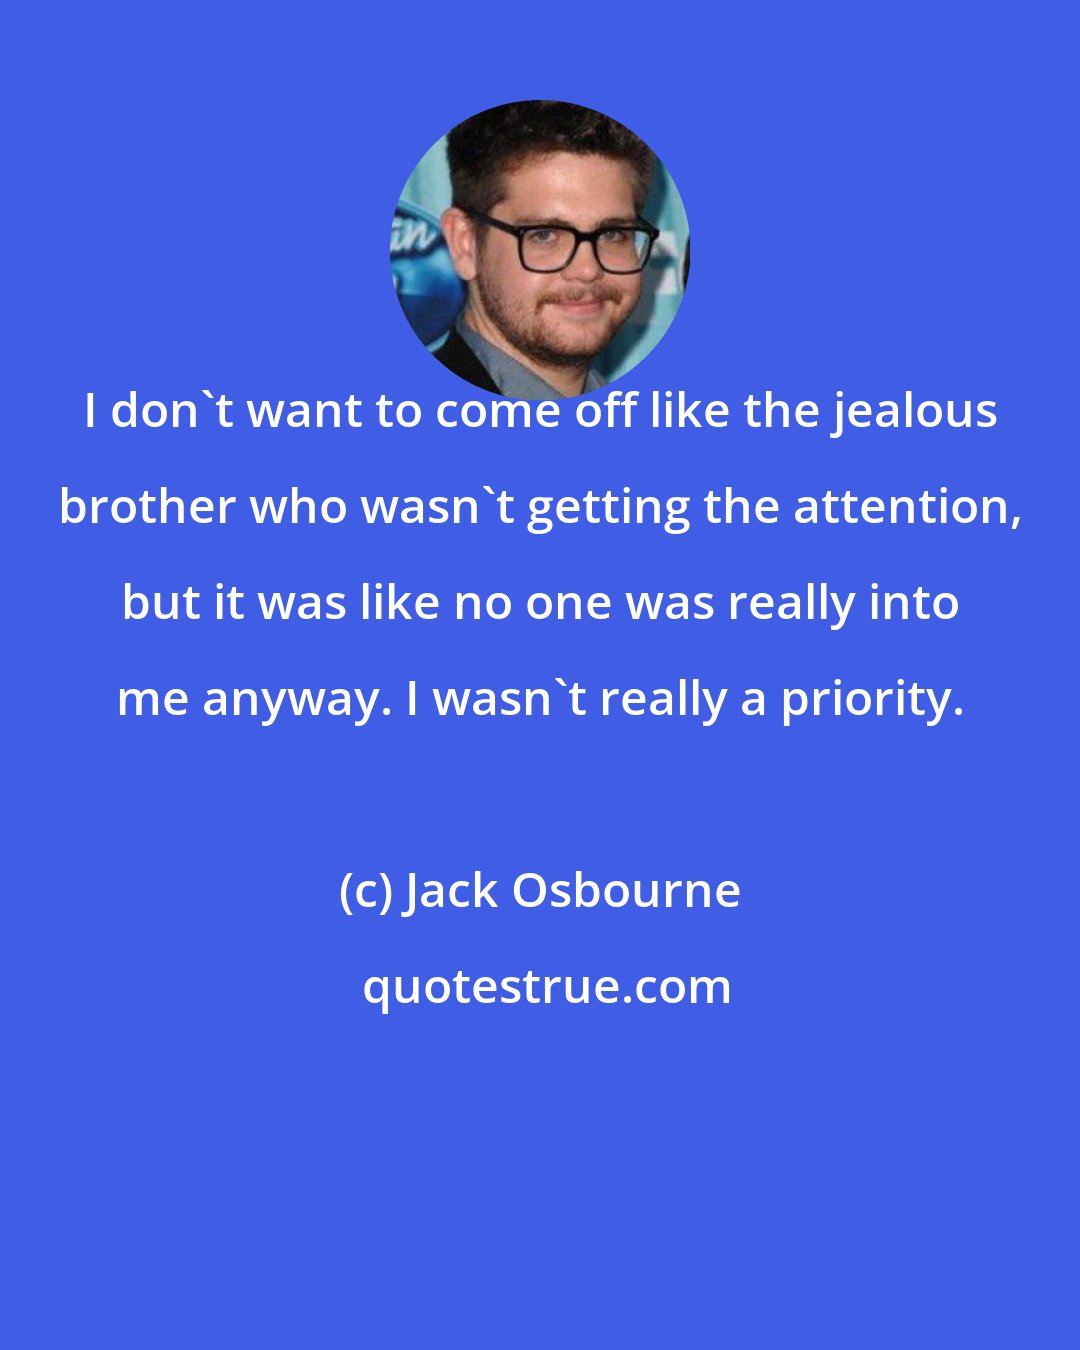 Jack Osbourne: I don't want to come off like the jealous brother who wasn't getting the attention, but it was like no one was really into me anyway. I wasn't really a priority.